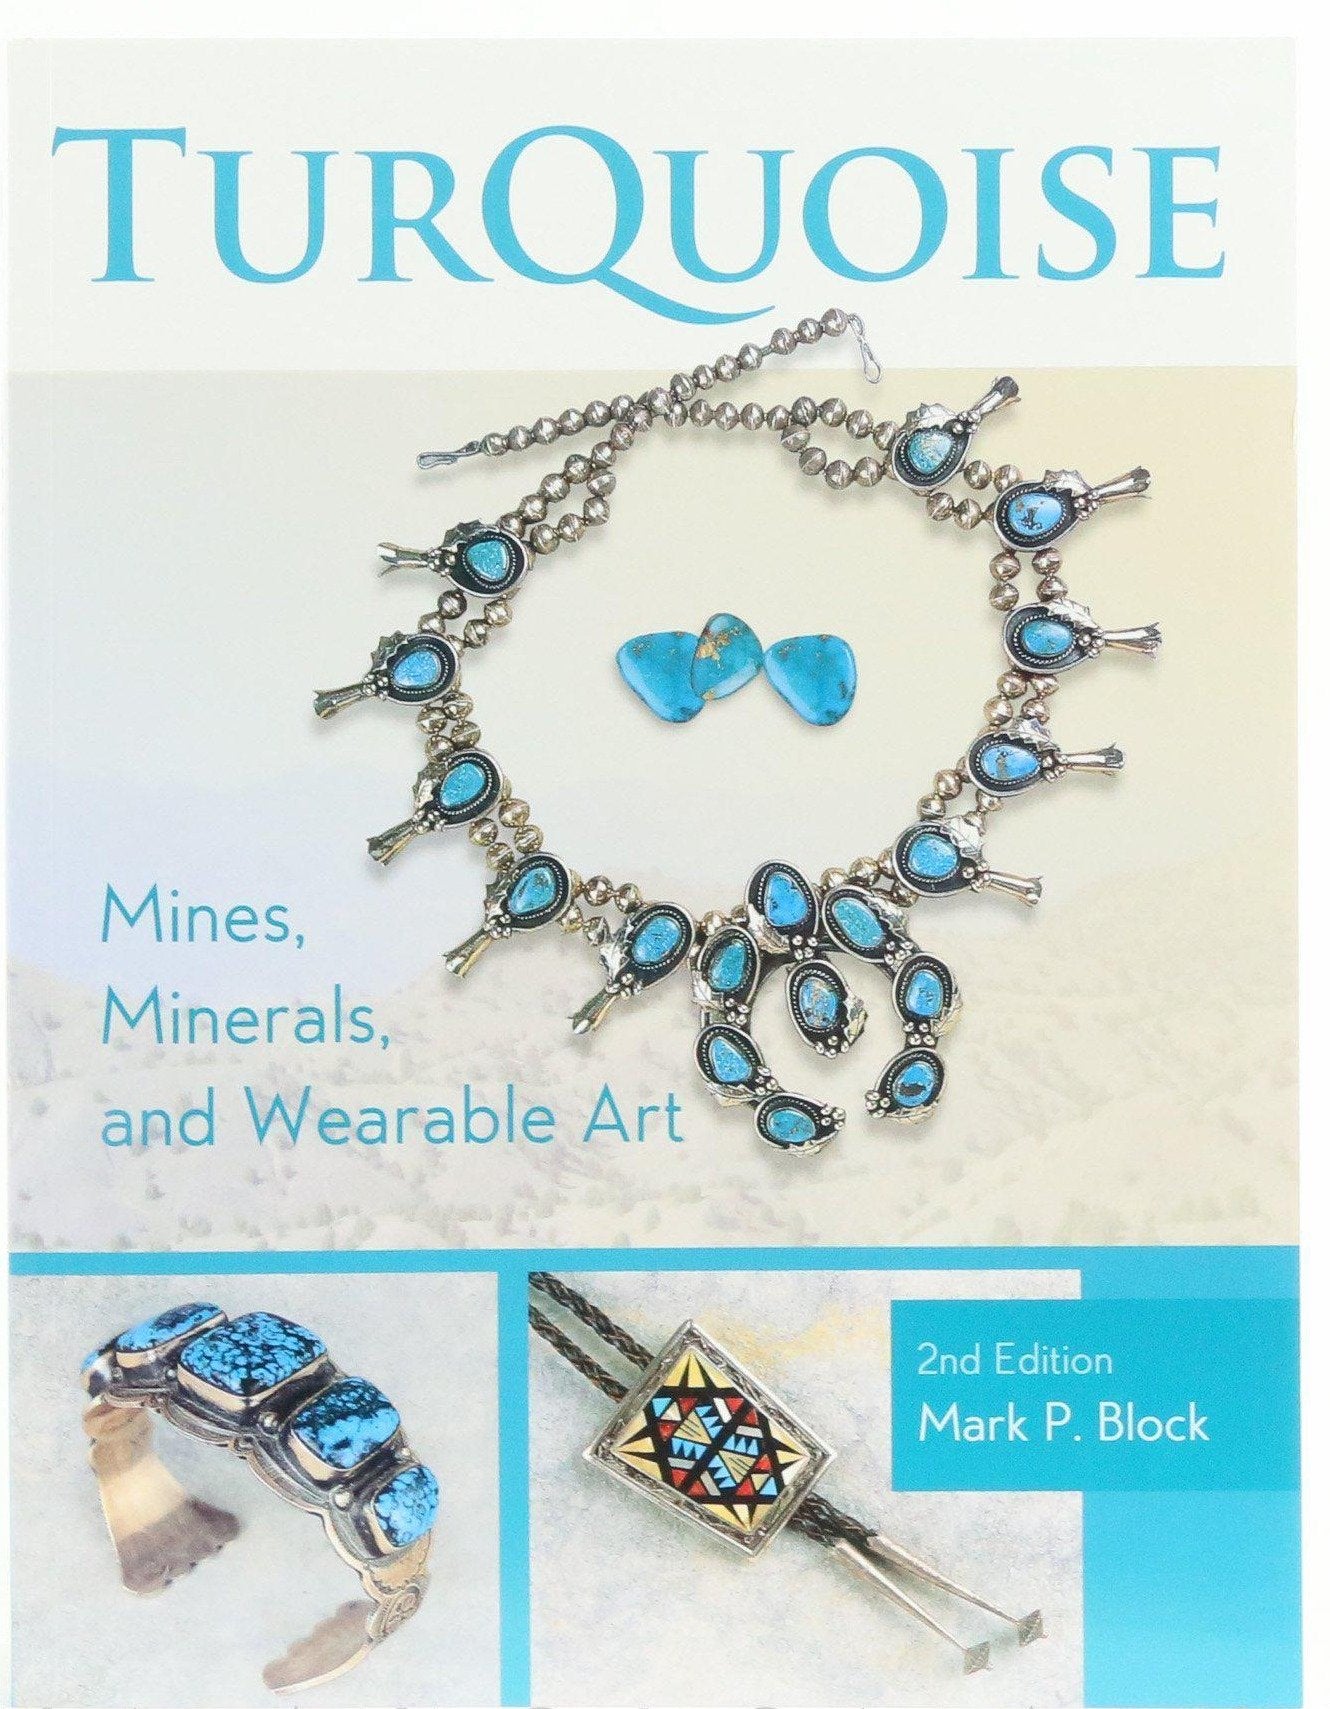 Turquoise: Mines, Minerals, and Wearable Art